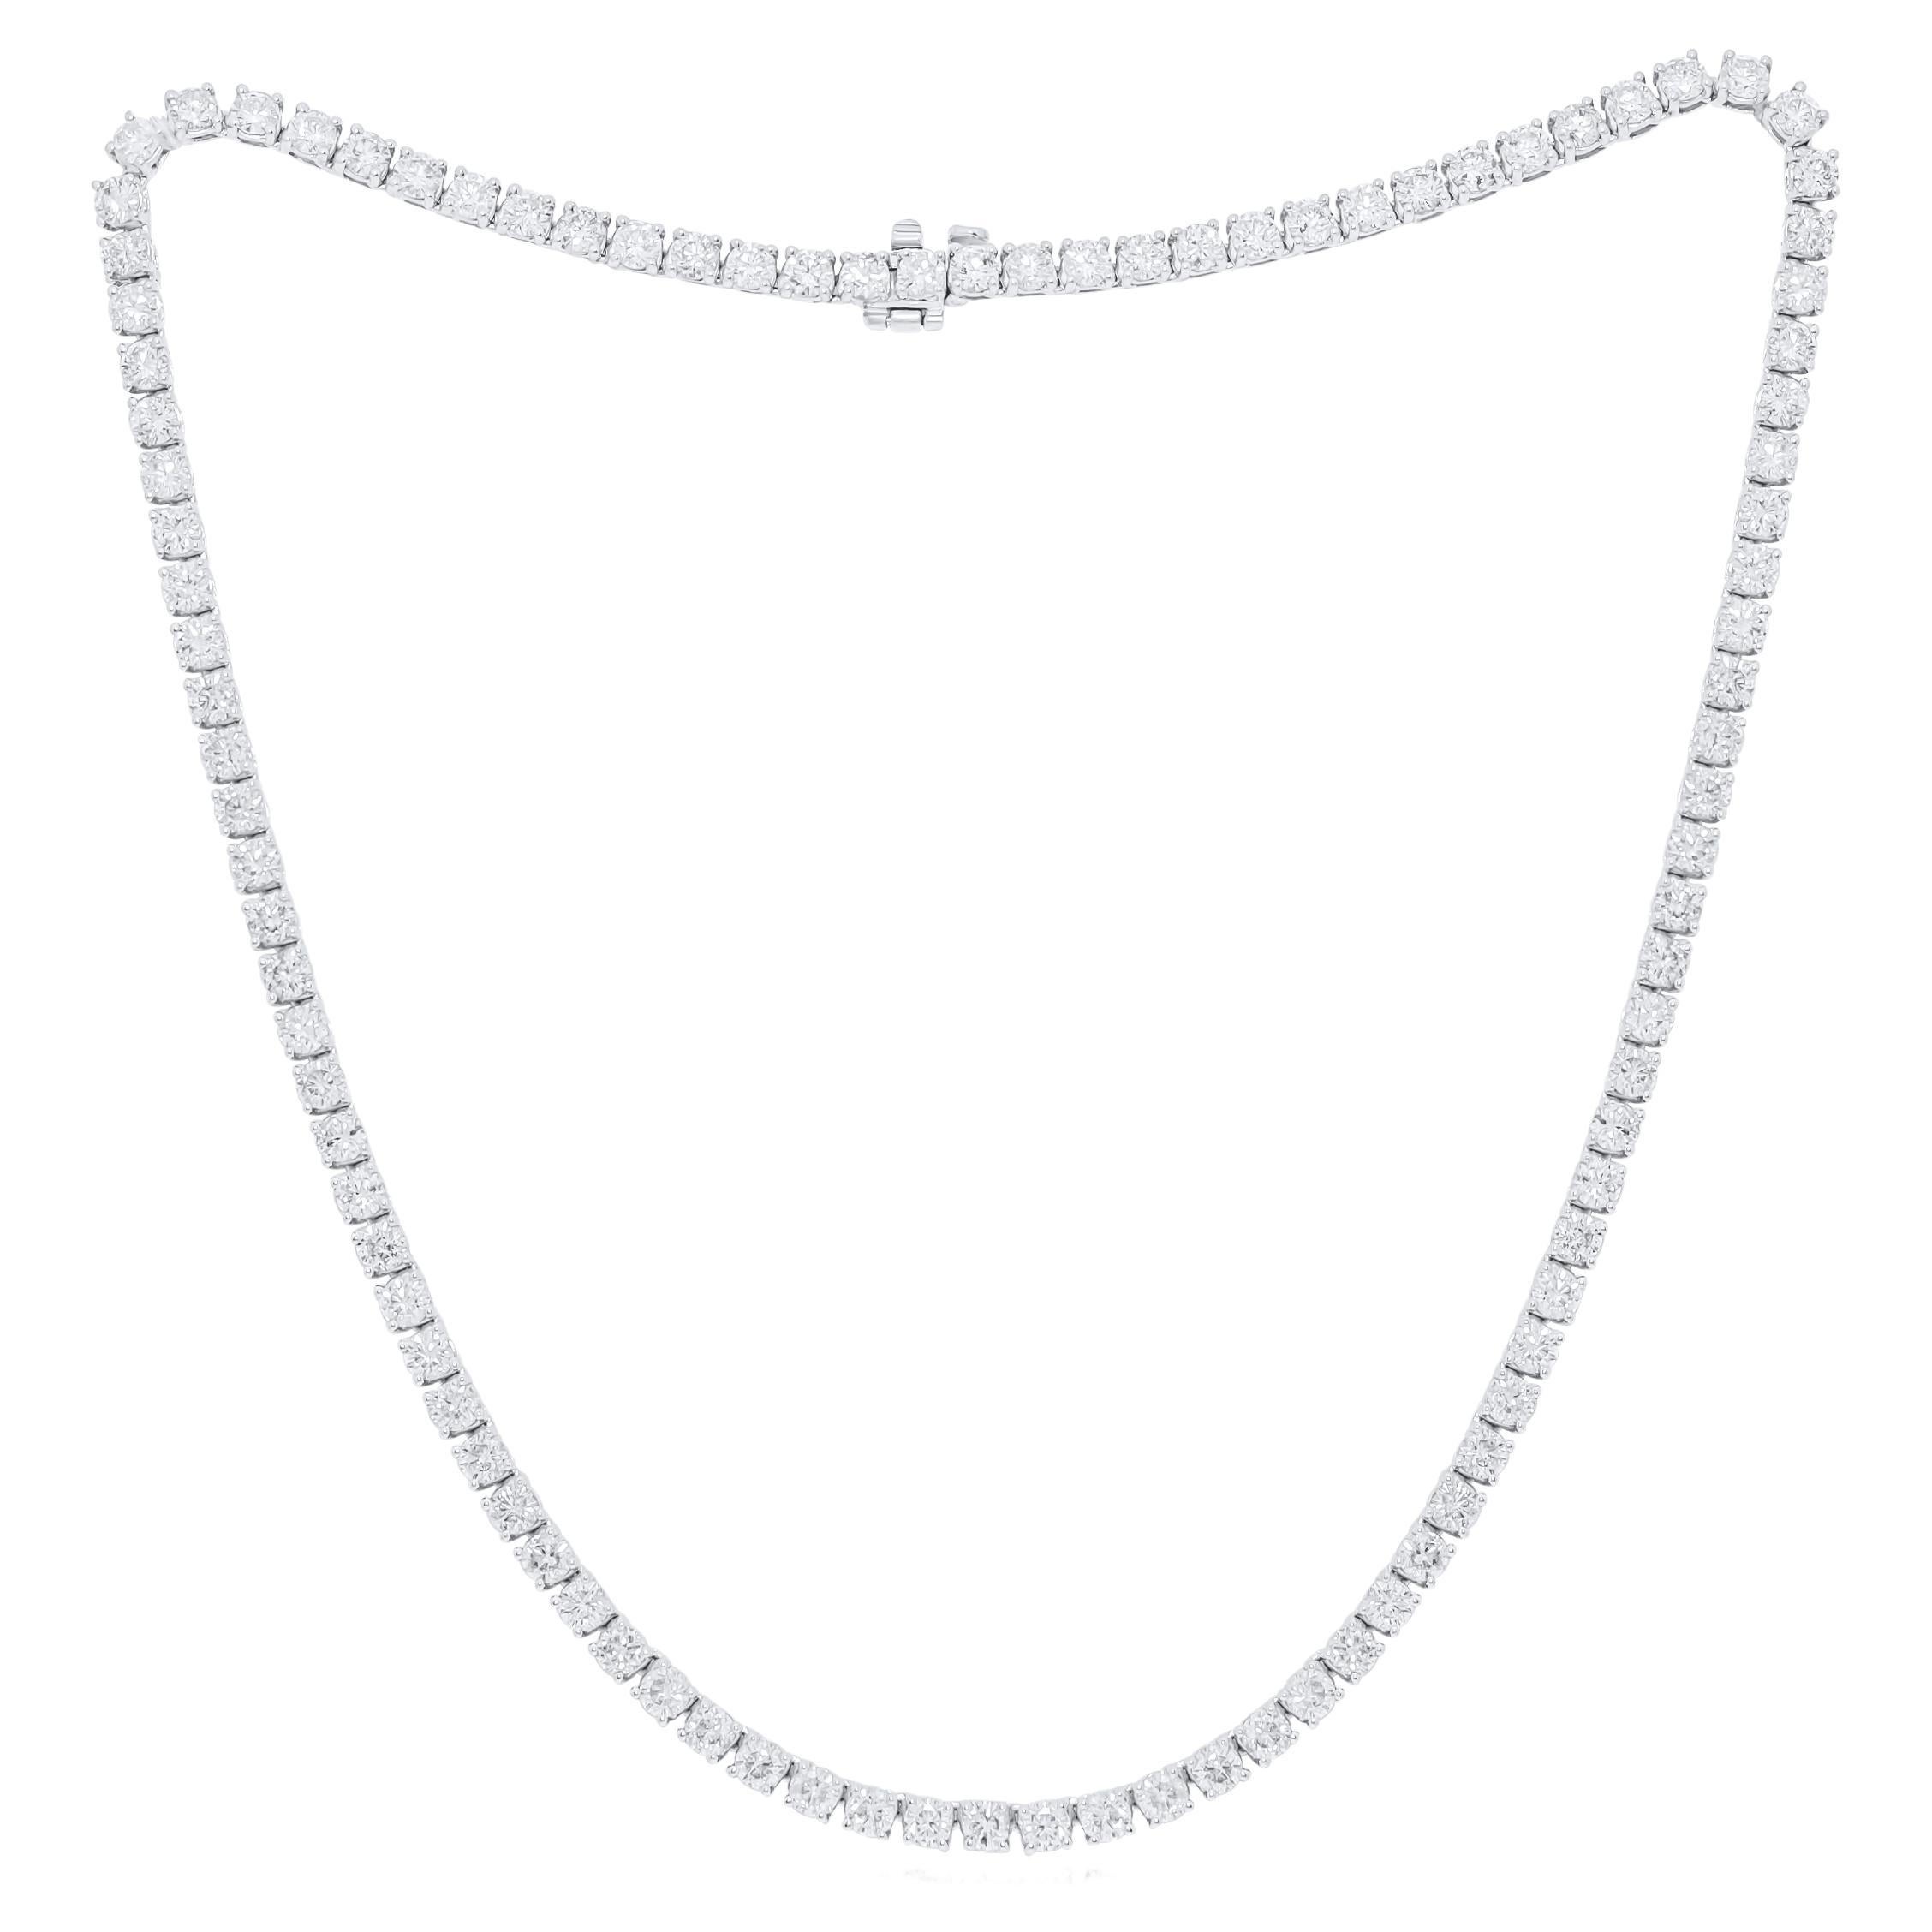 Diana M. Custom 21.15 cts 4 Prong Diamond 18k White Gold 17" Tennis Necklace  For Sale